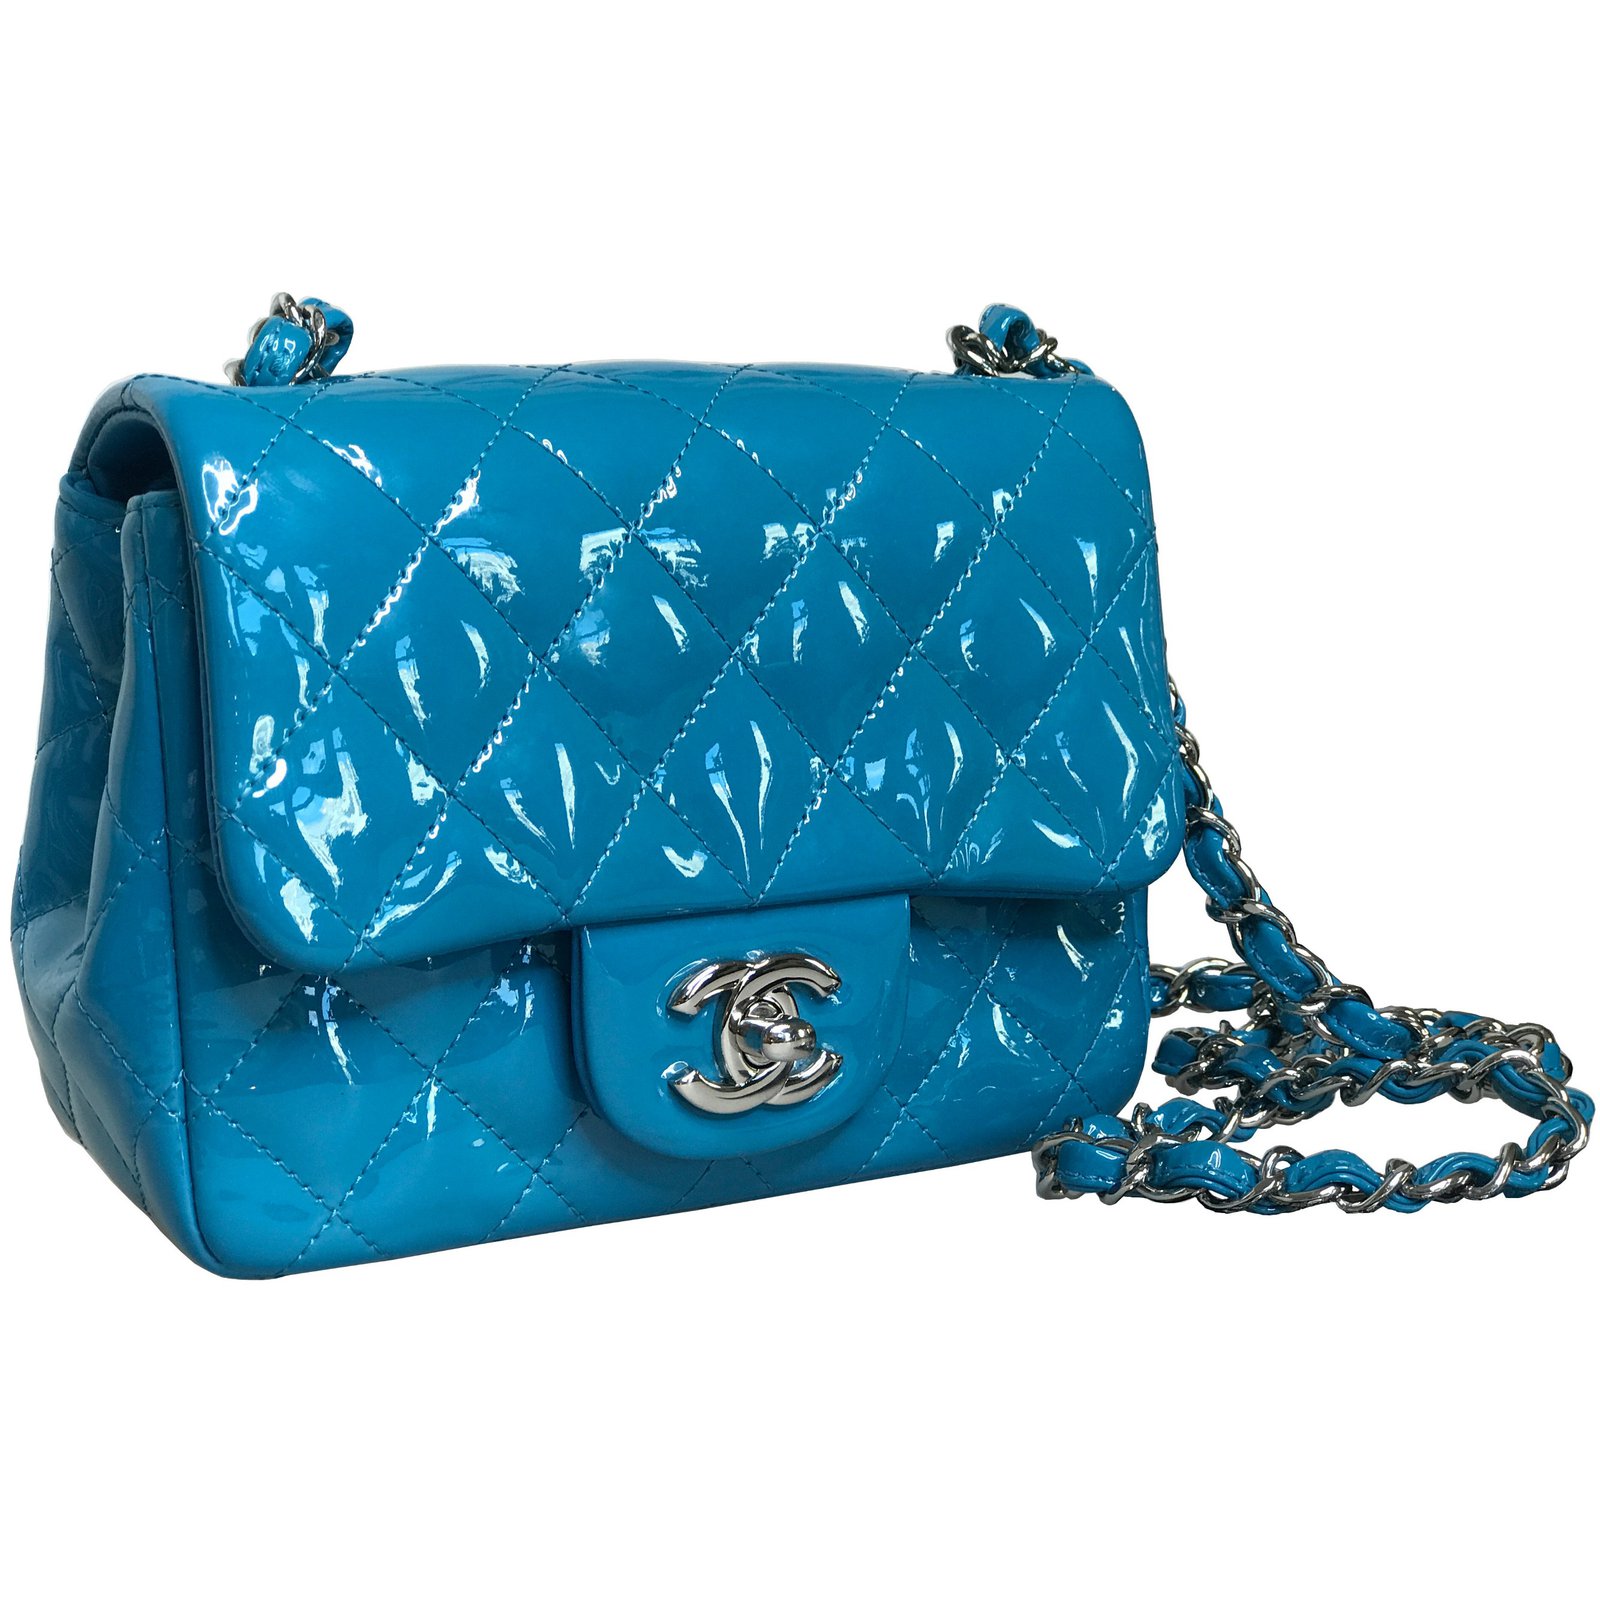 Chanel Turquoise Extra Mini Flap Precious Jewel Limited 255 Bag   Boutique Patina